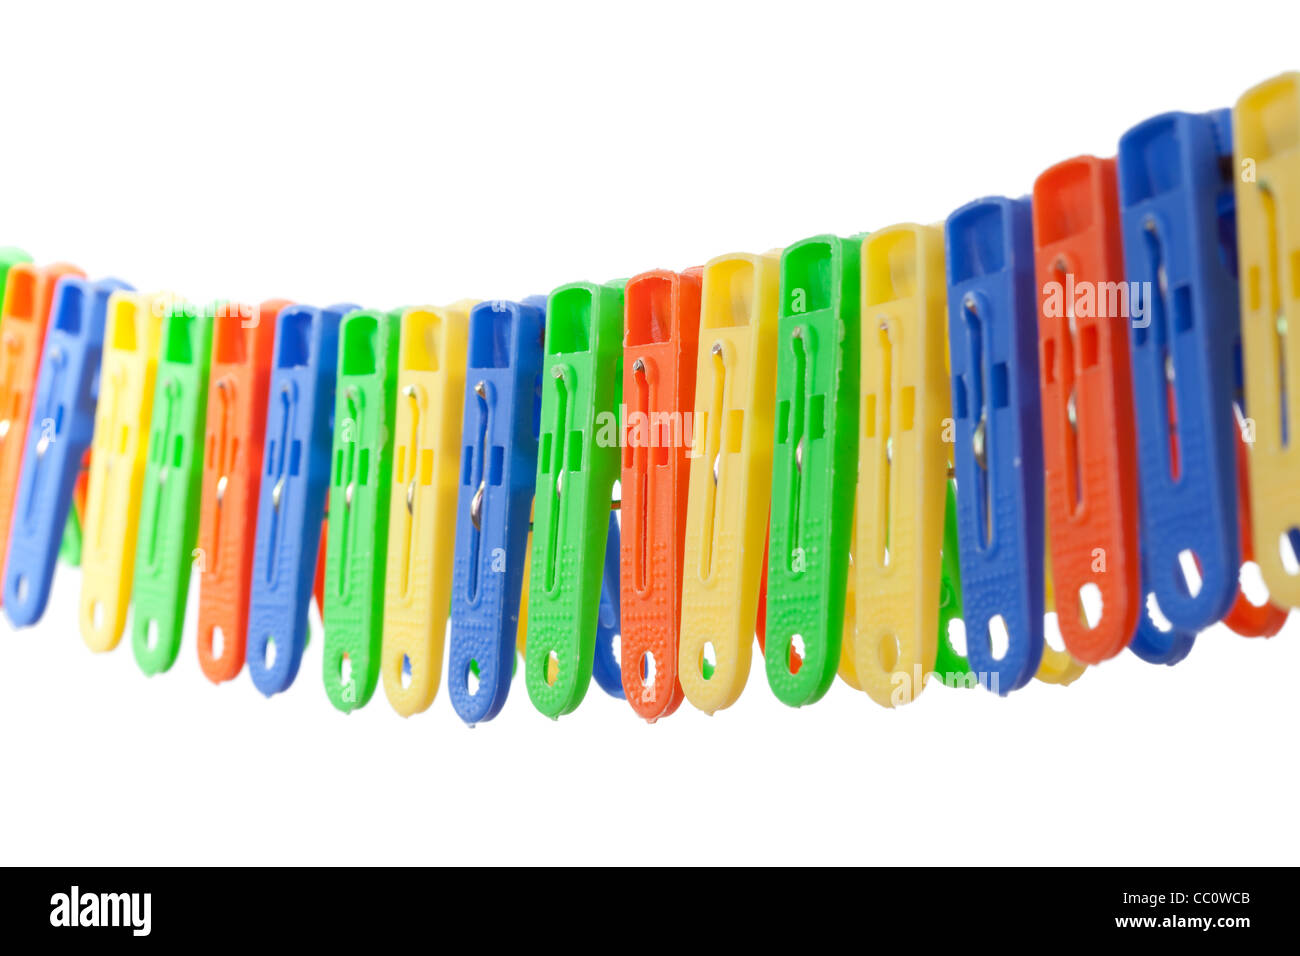 Colorful row of clothes pegs hang on clothesline Stock Photo